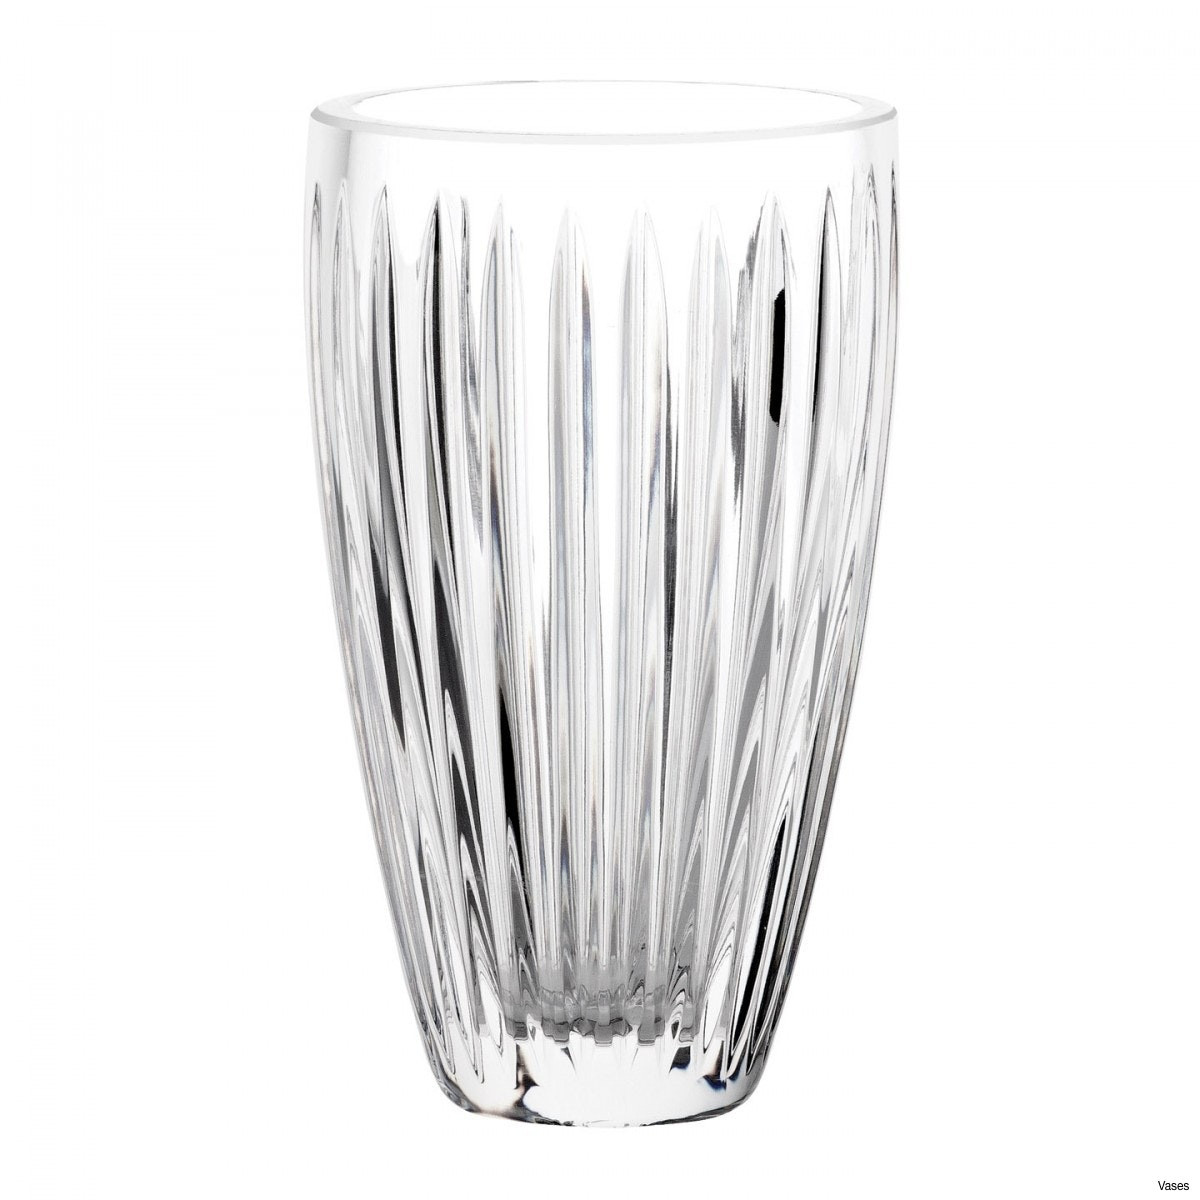 18 Fashionable Waterford 10 Inch Vase 2024 free download waterford 10 inch vase of bezed ac289lagant fmp 189 1016 bezel reset switch 1 2od s s fmp 189 in bezed best marquis crosby 9in vase h vases waterford vasei 2d image of bezed ac289lagant fmp